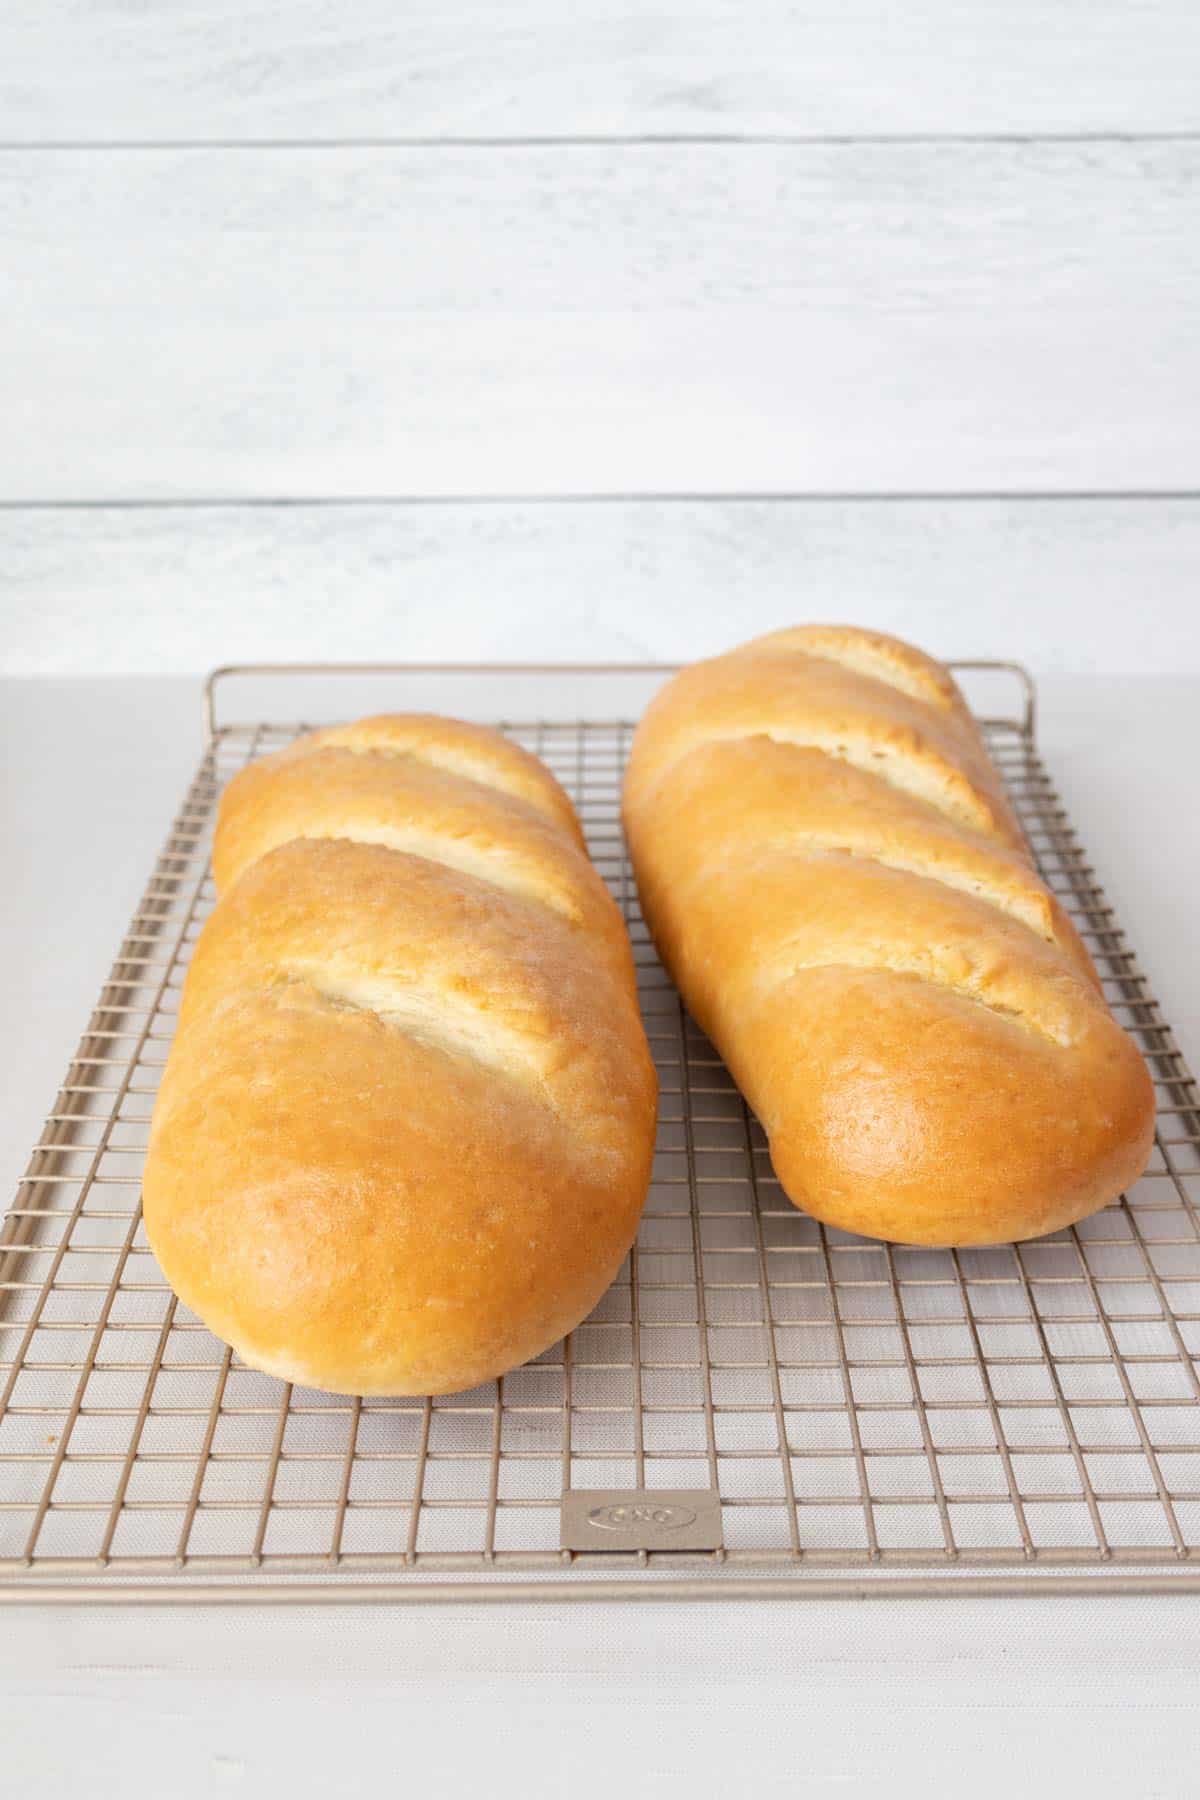 Two baked loaves of French bread on a wire cooling rack.